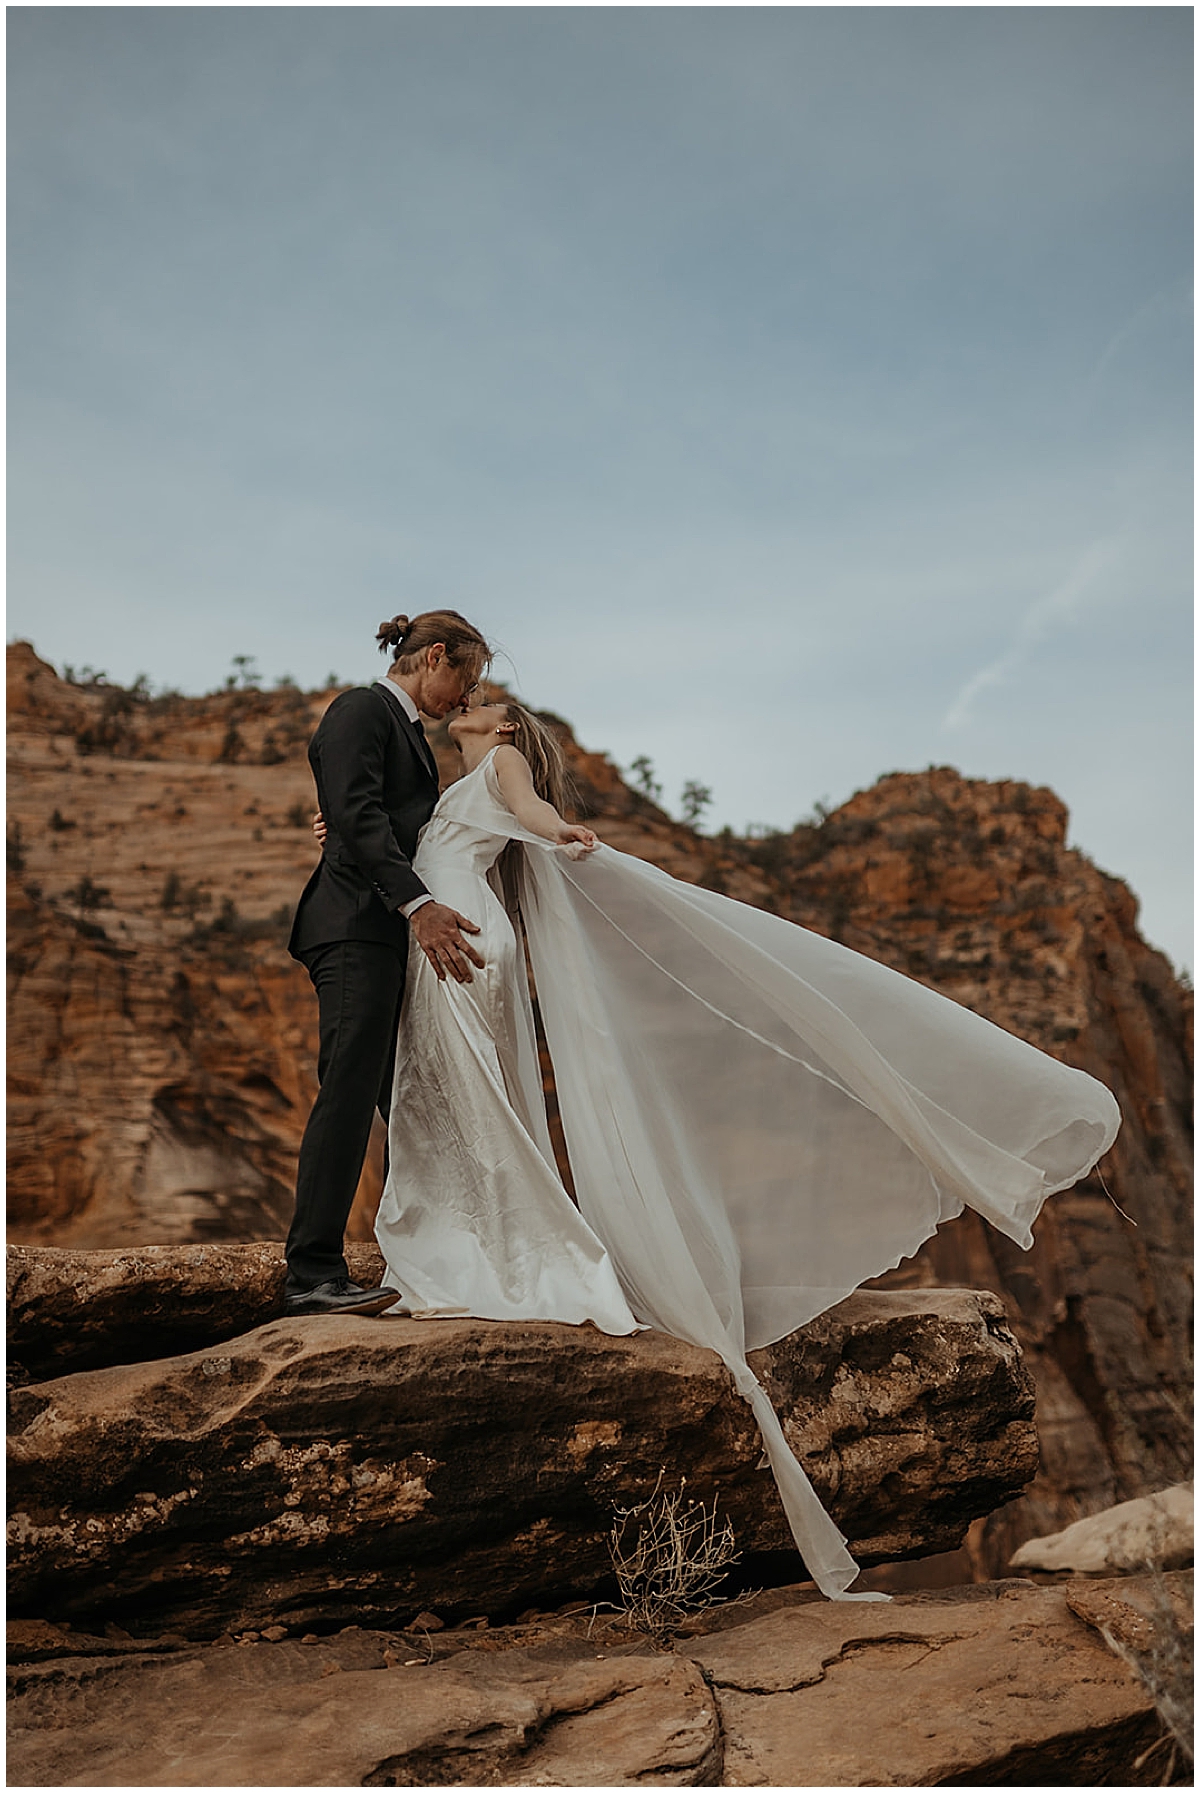 Bridal portraits with autumn and cole in zion national park taken by Kim Kaye Photography